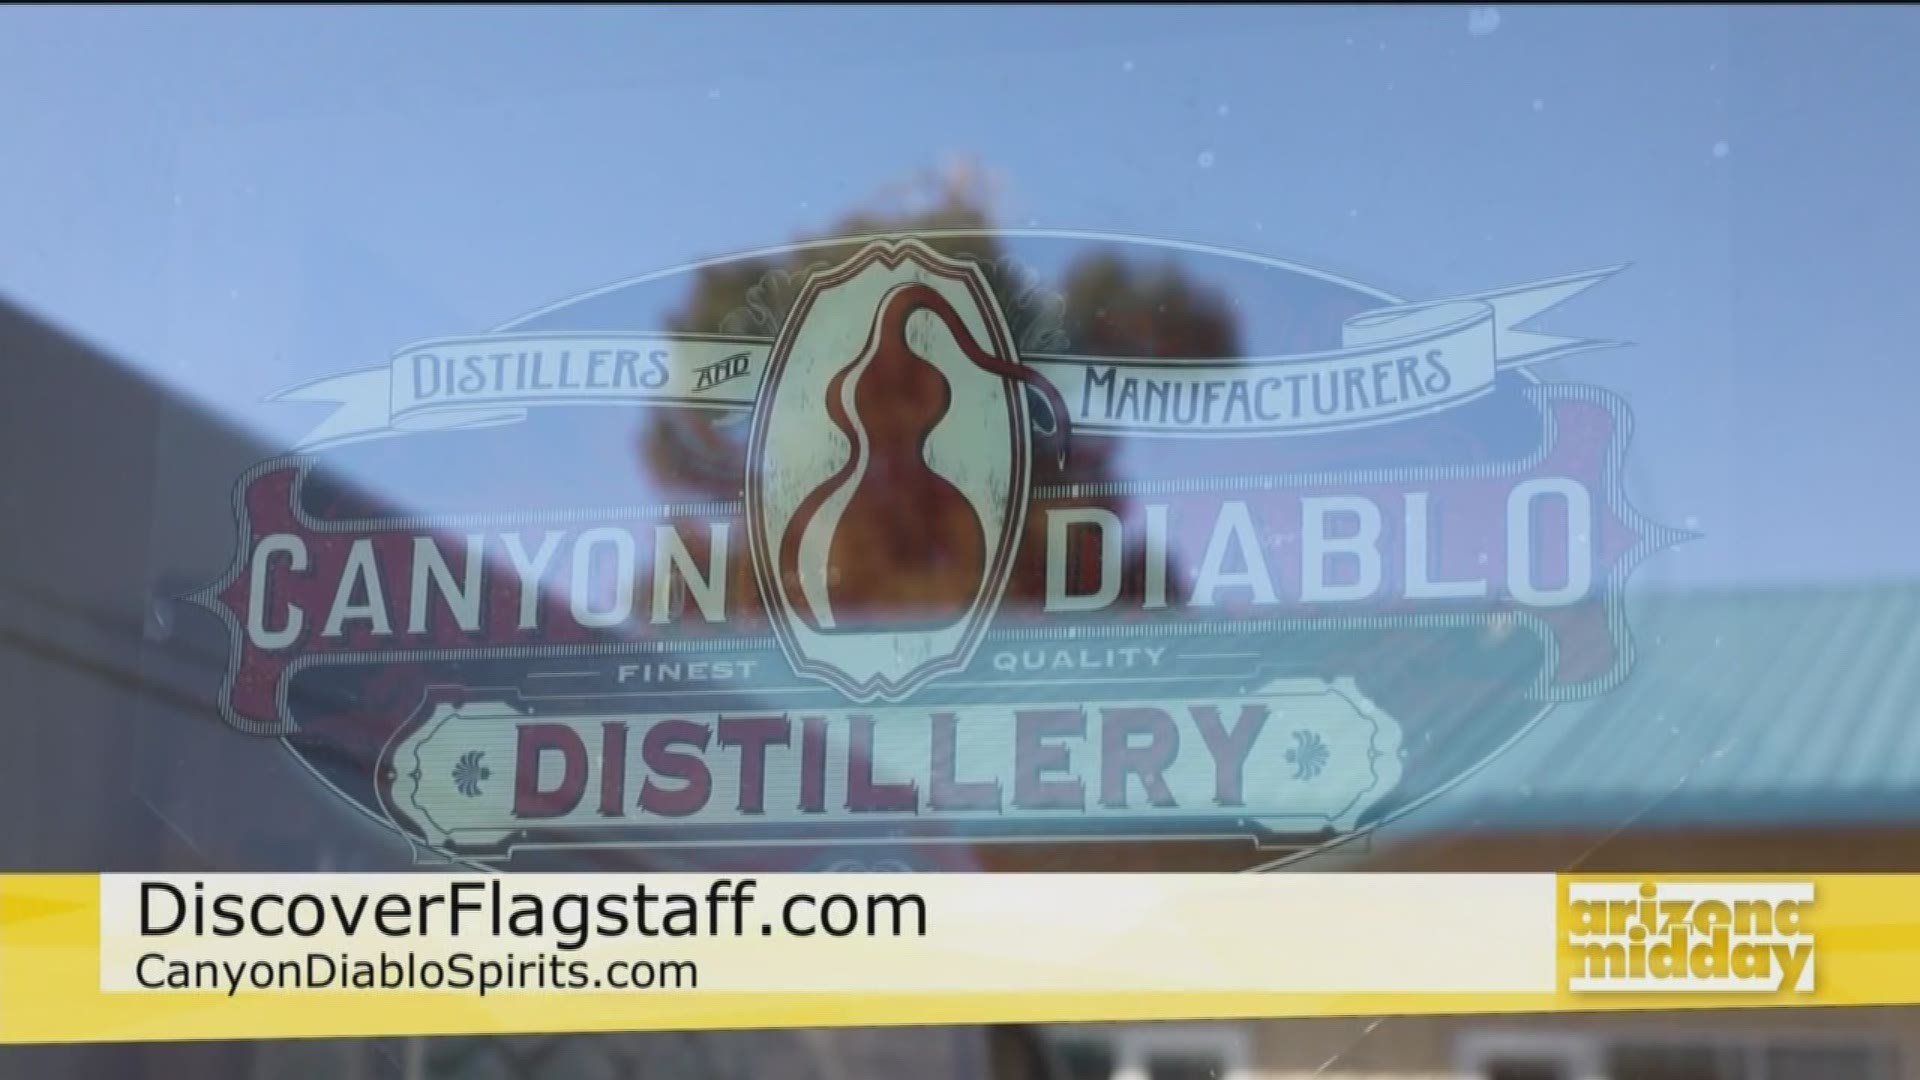 Joe Pendergast with Canyon Diablo Distillery shows us the local-made spirits and gives us an Arizona history lesson.